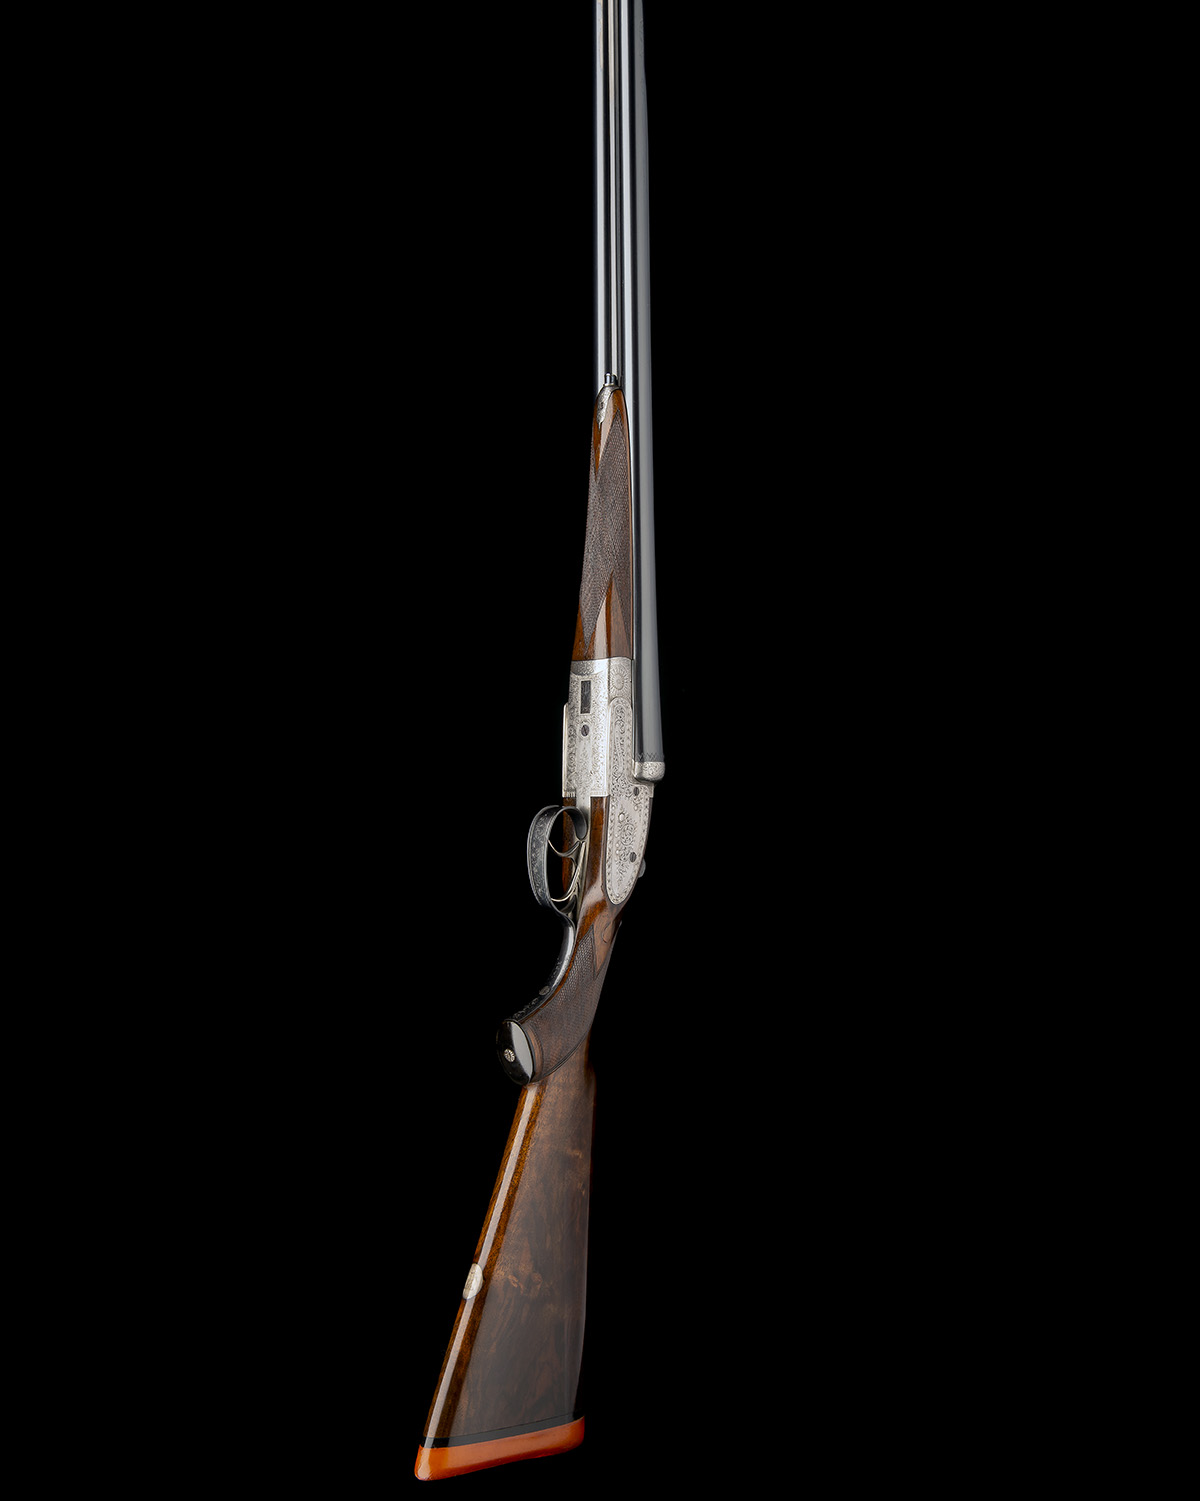 CHARLES HELLIS & SONS A 12-BORE (3IN.) SIDELOCK NON-EJECTOR PIGEON / WILDFOWLING GUN, serial no. - Image 3 of 8